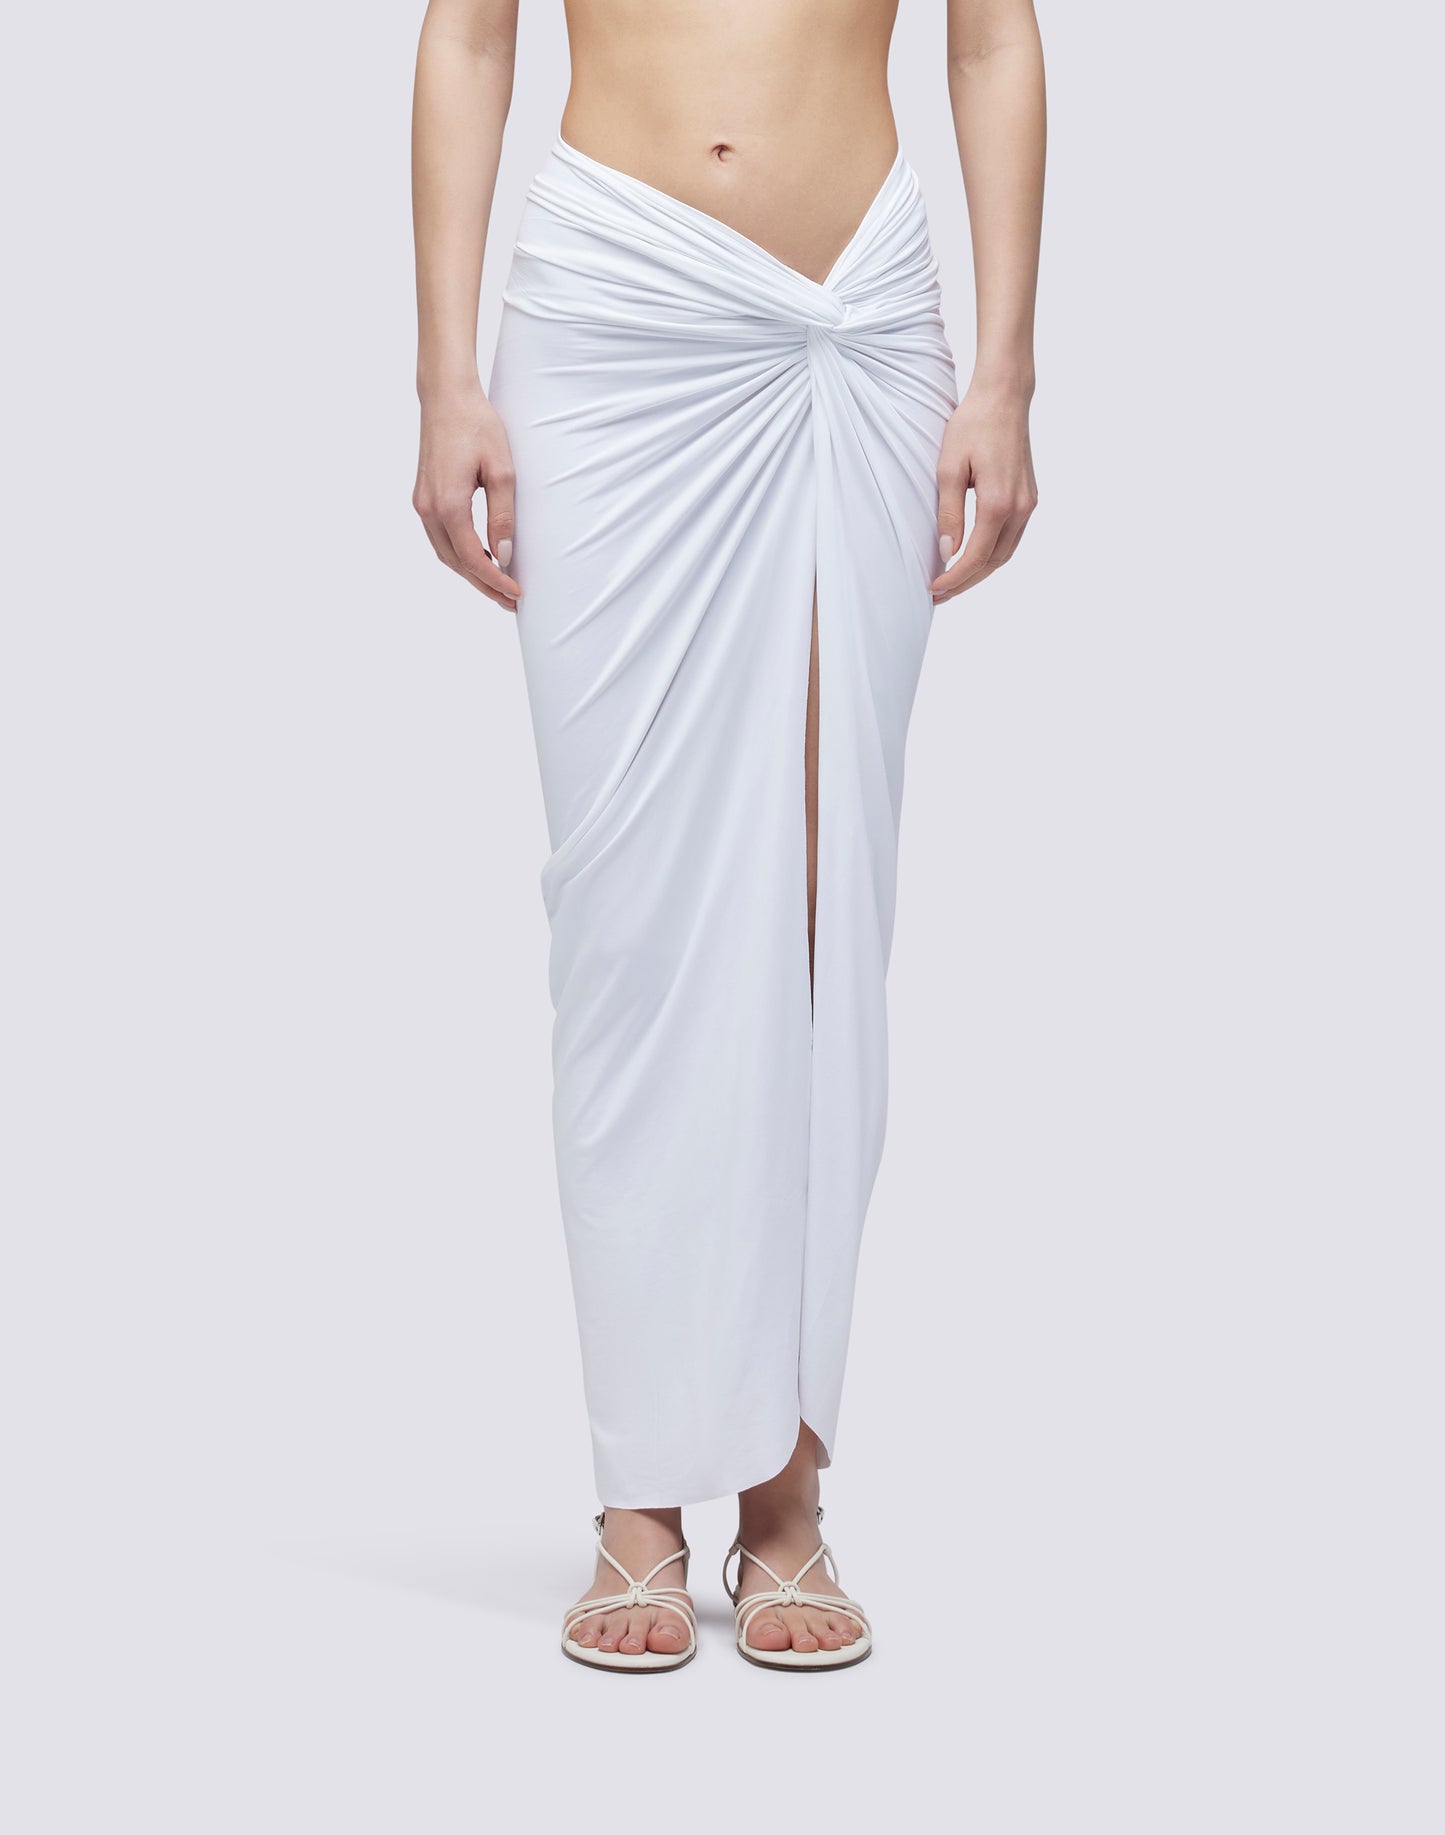 PAREO SKIRT IN WRINKLED EFFECT SARONG